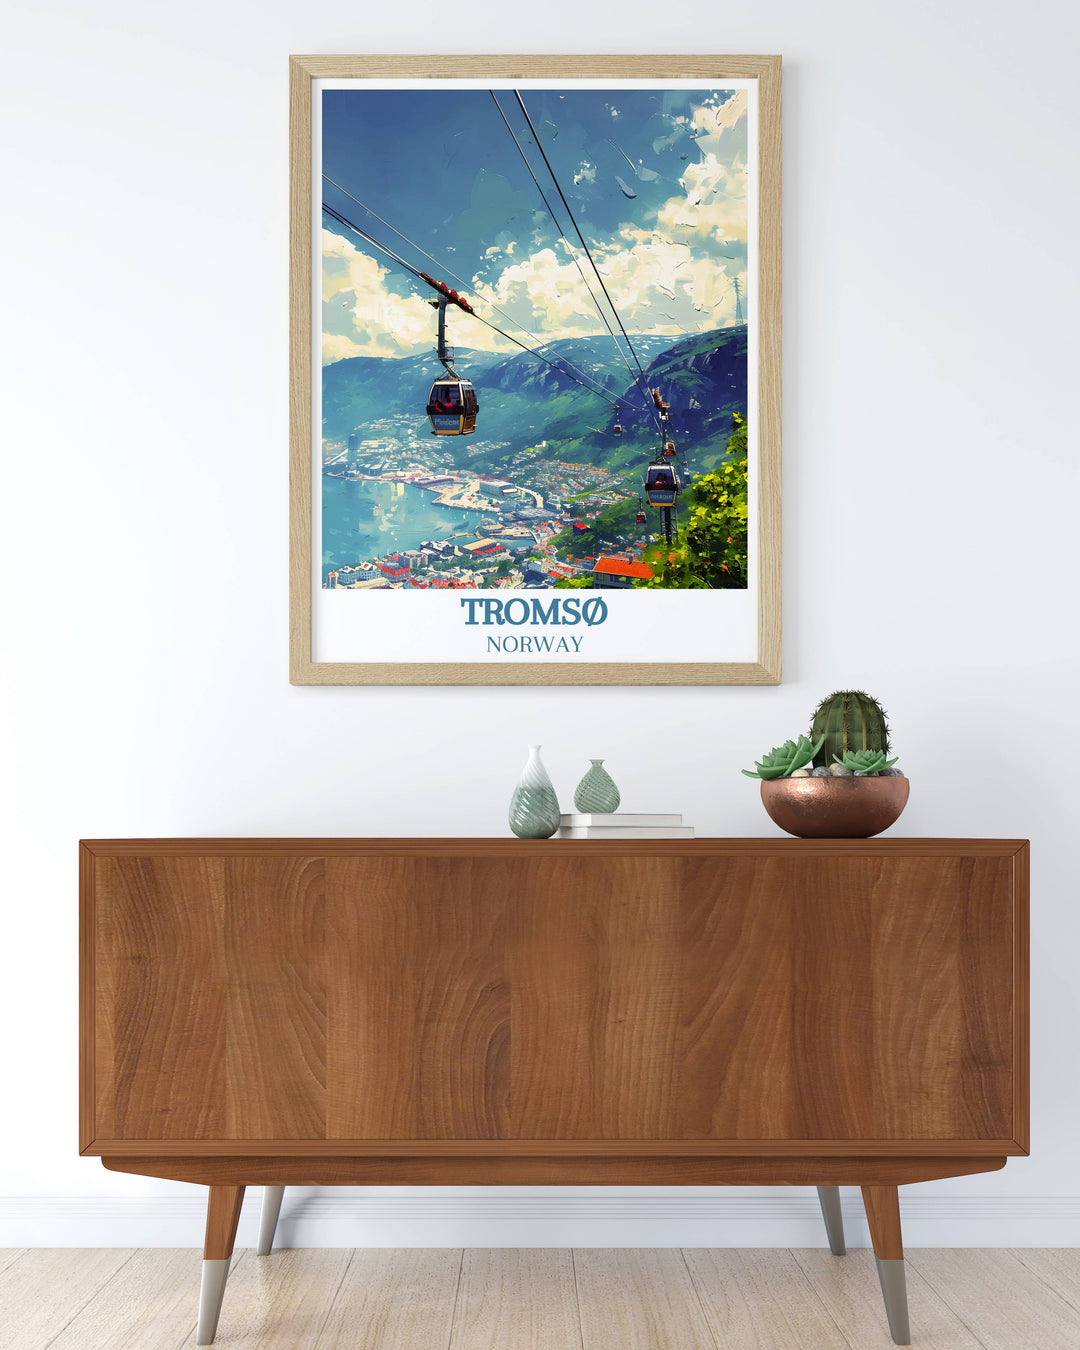 Vibrant home decor piece showcasing the Fjellheisen cable car in Tromso, Norway, set against a picturesque backdrop of snow covered peaks and serene valleys.